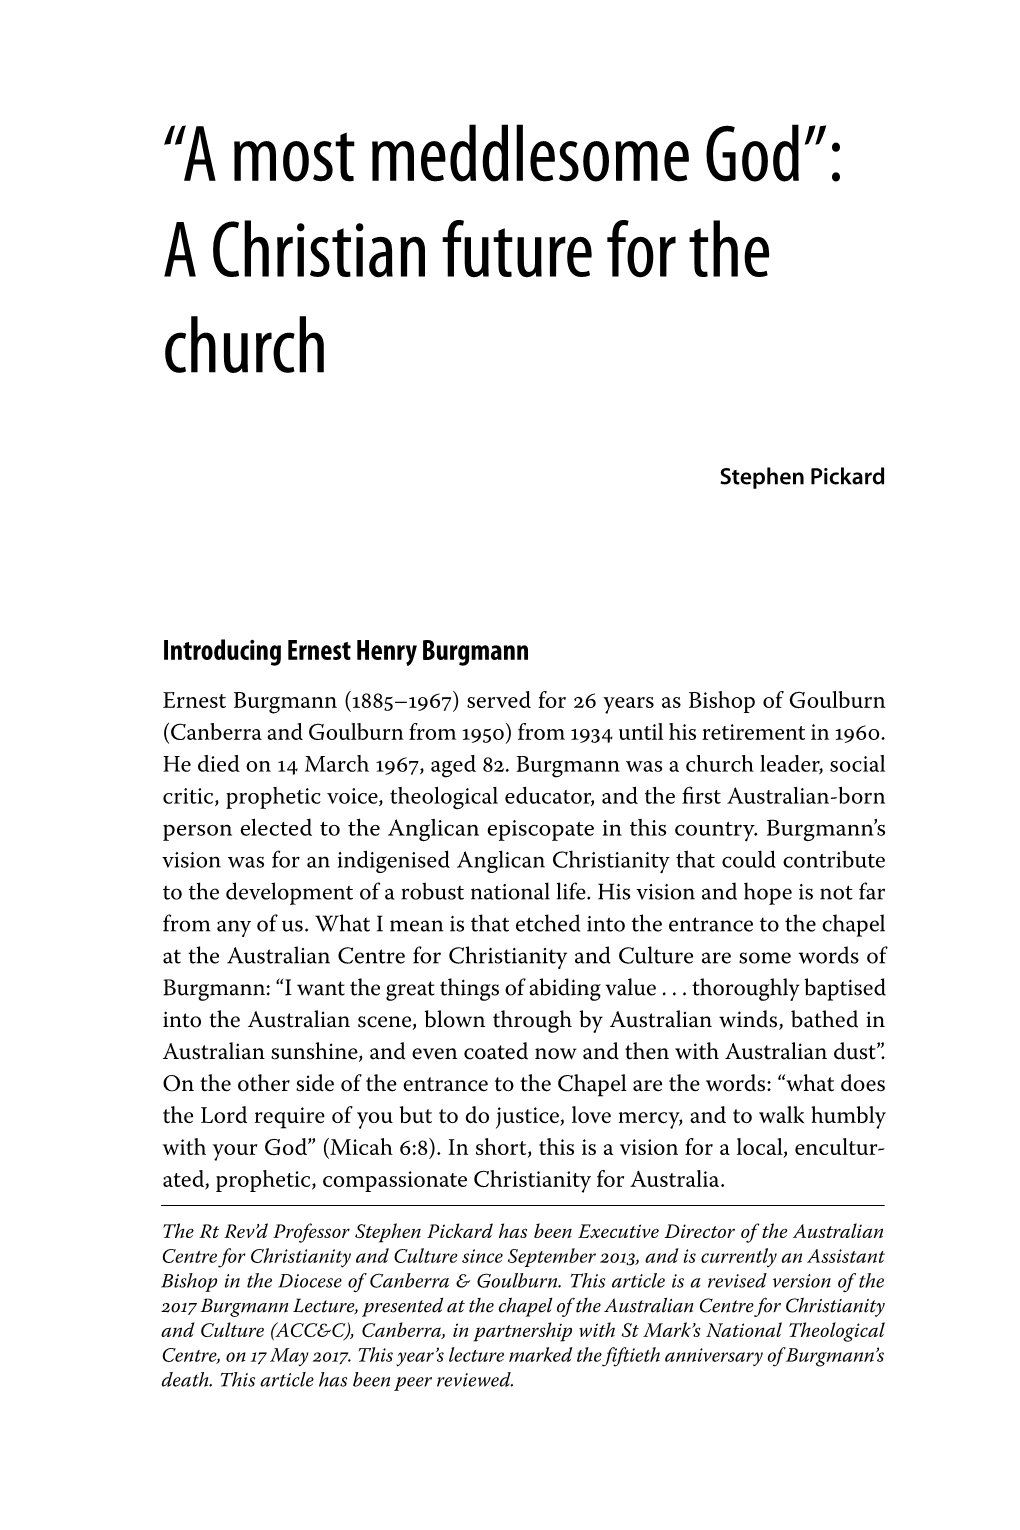 “A Most Meddlesome God”: a Christian Future for the Church